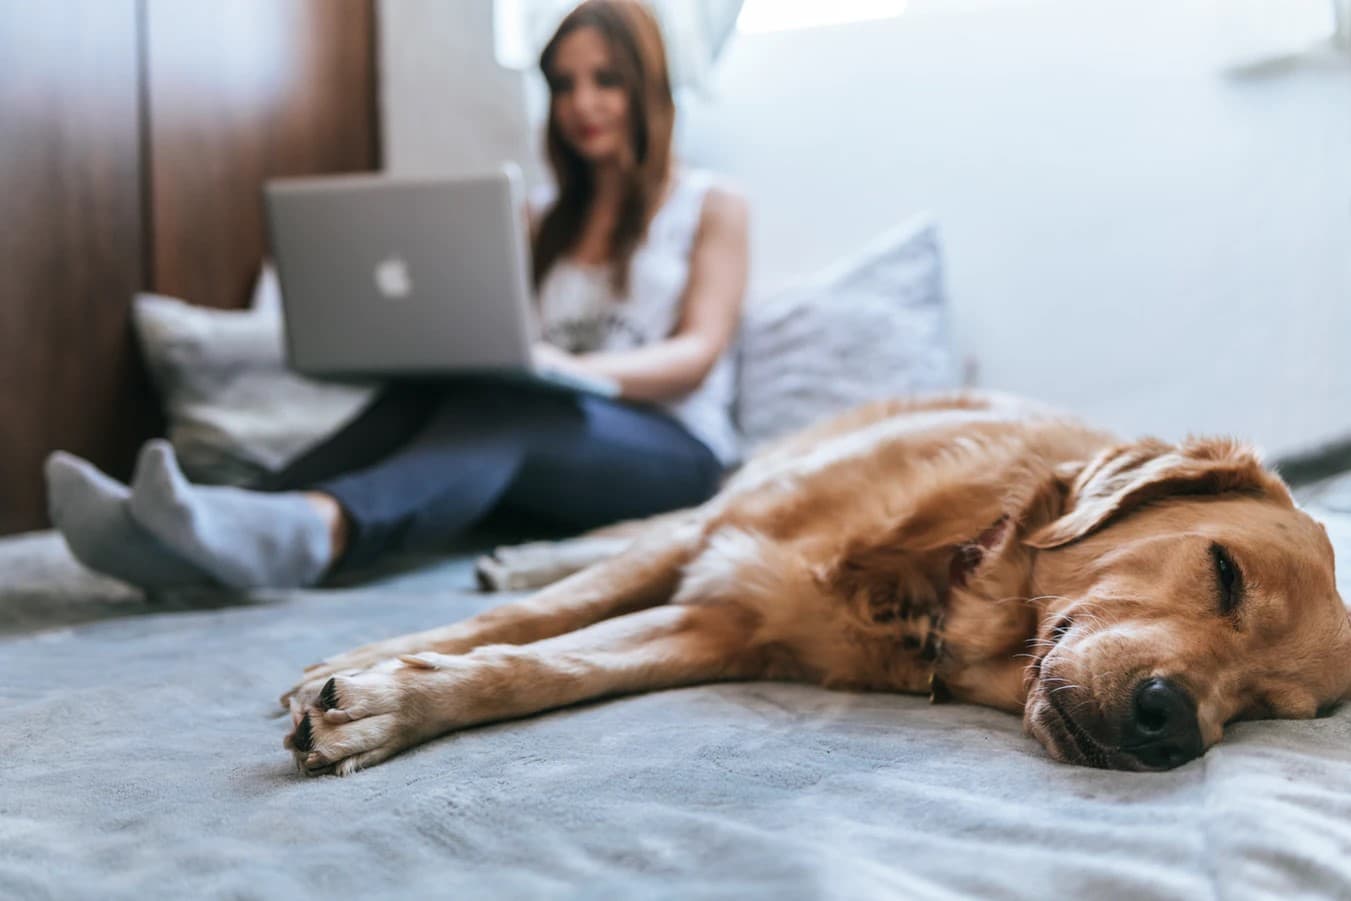 Woman enjoys online shopping with dog